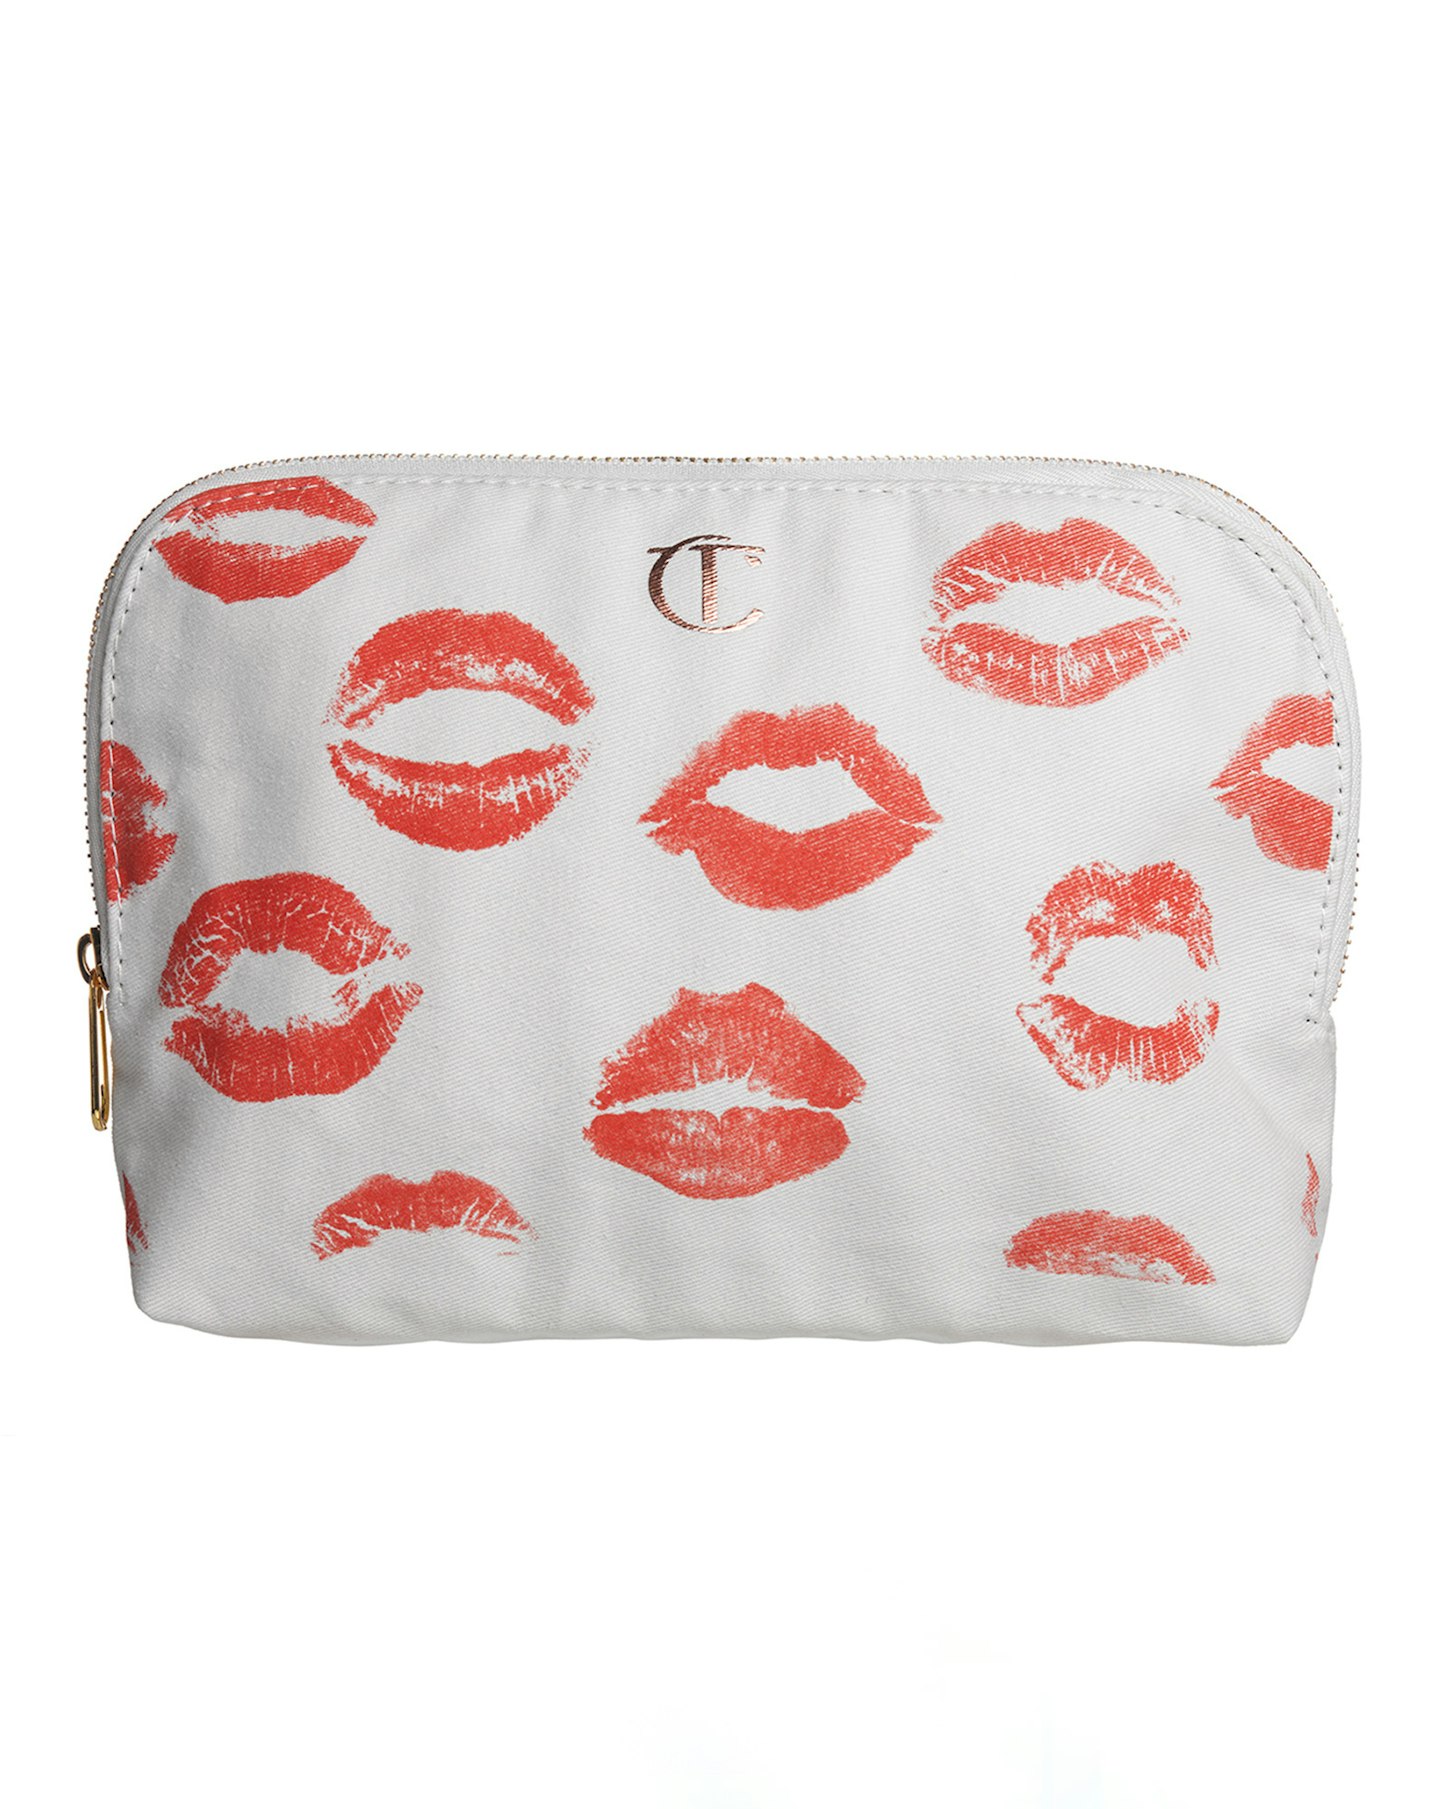 Best Make-up Bags